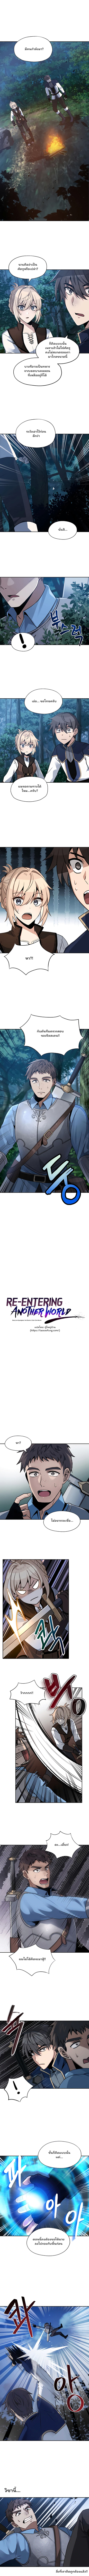 Re-entering Another World 8-8